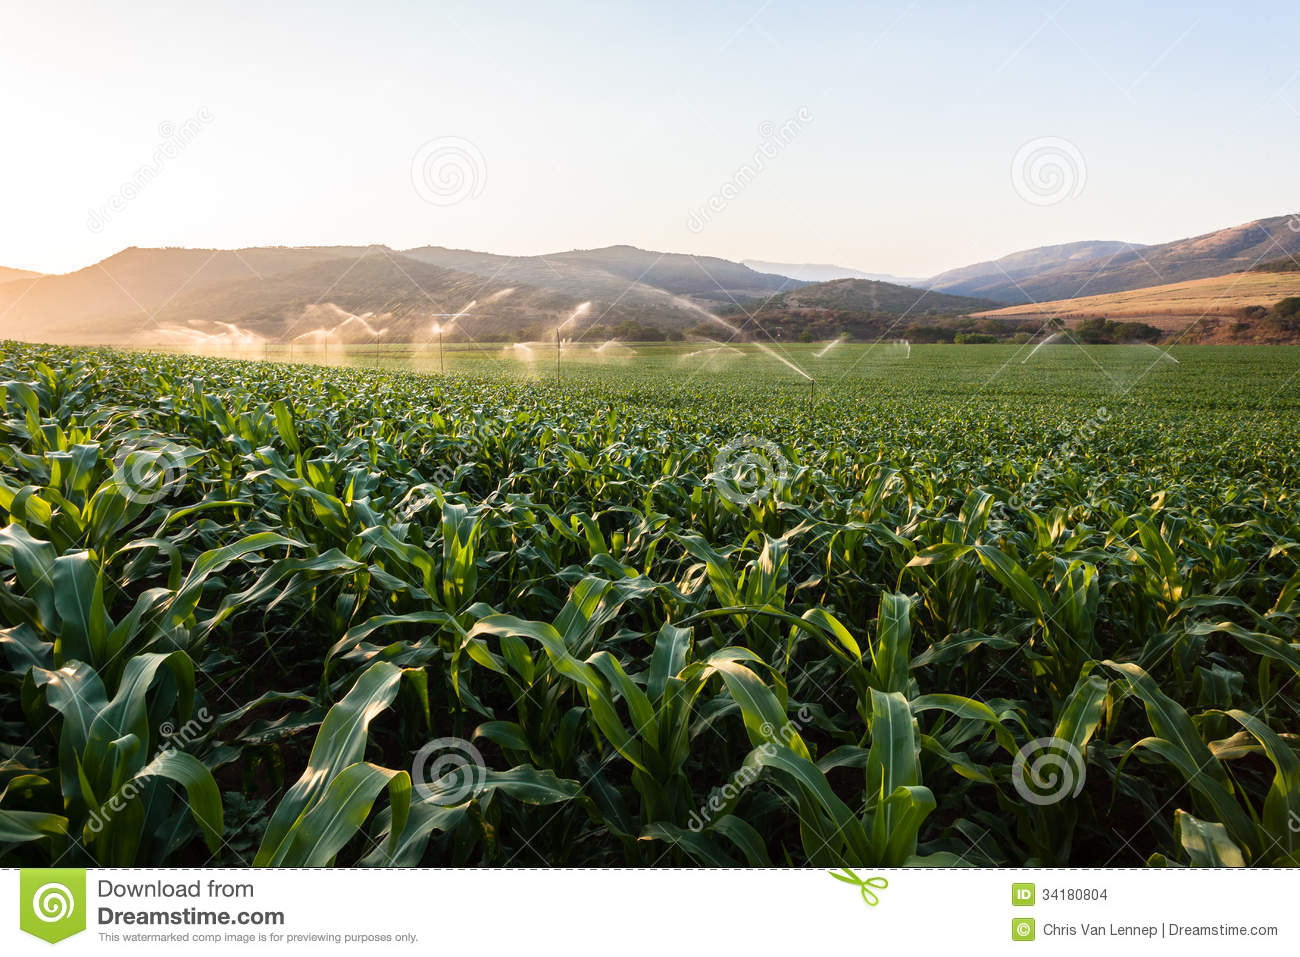 More Similar Stock Images Of   Farming Maize Crop Water Sprinklers